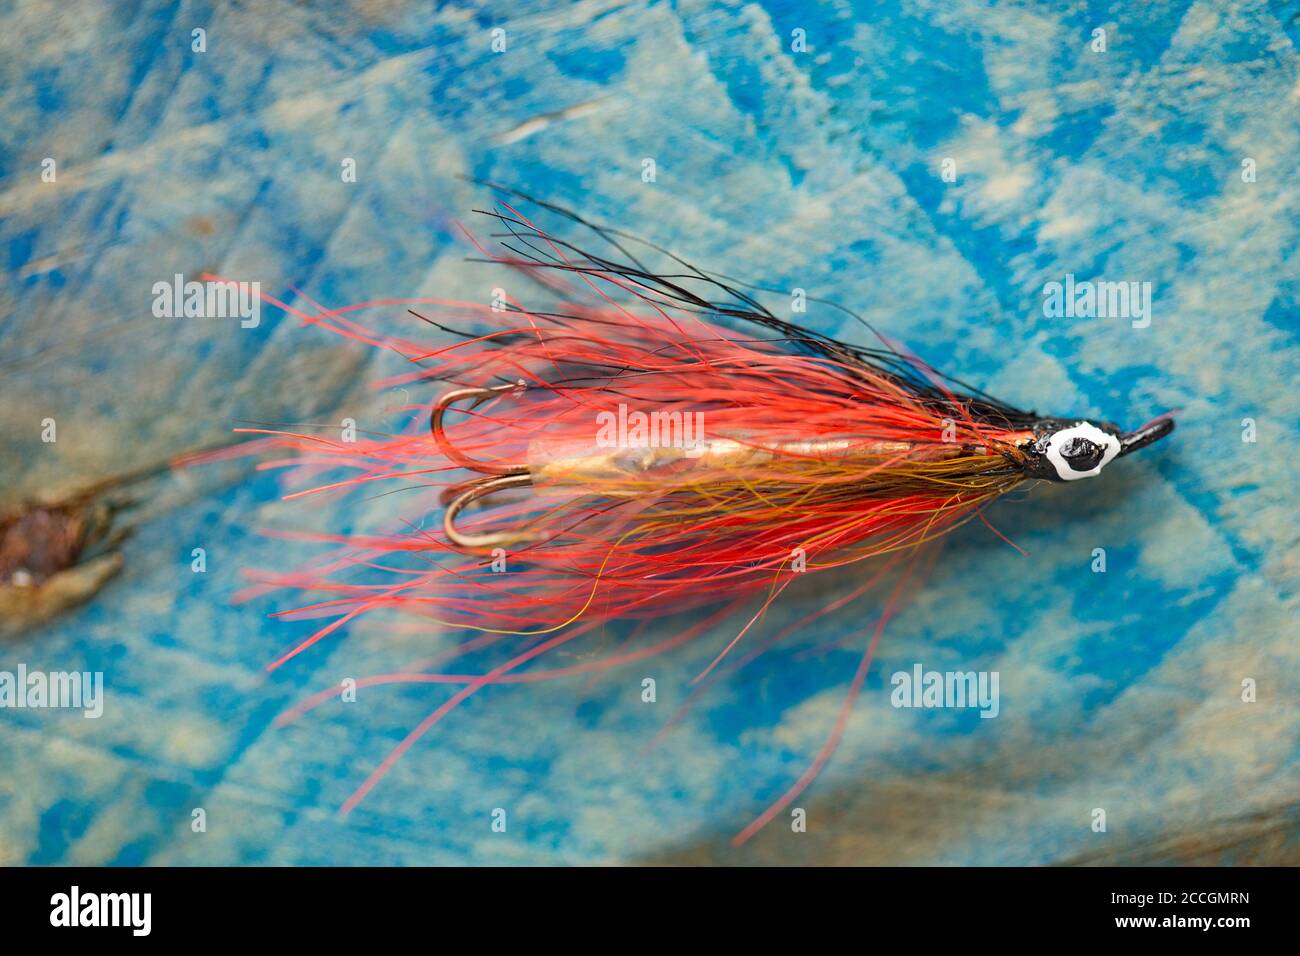 https://c8.alamy.com/comp/2CCGMRN/an-old-salmon-fly-equipped-with-a-treble-hook-taken-from-a-fly-box-or-reservoir-displayed-on-a-piece-of-driftwood-from-a-collection-of-fishing-tac-2CCGMRN.jpg